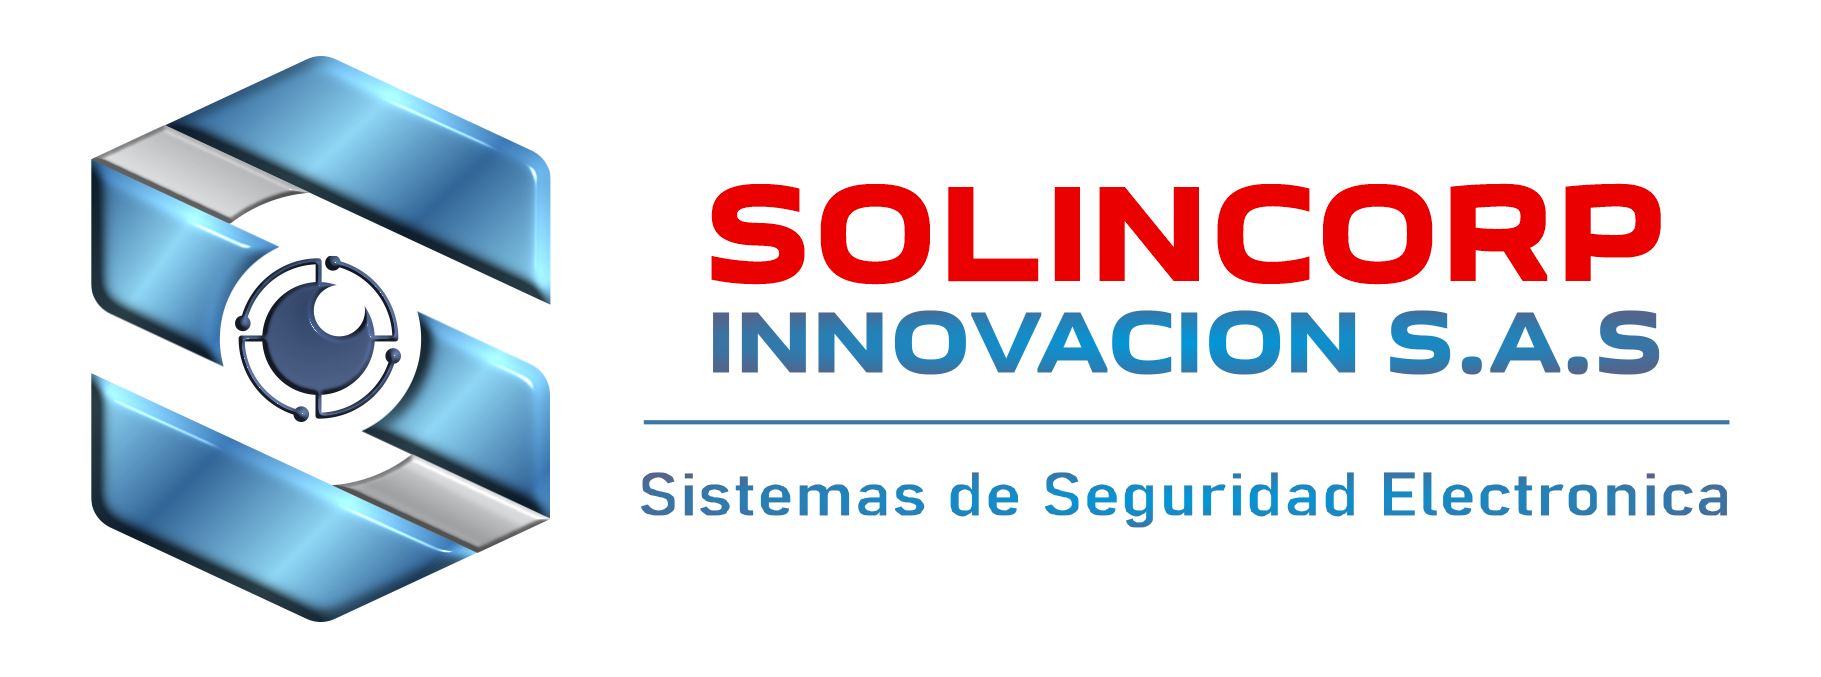 Solincorp S.A.S. logo